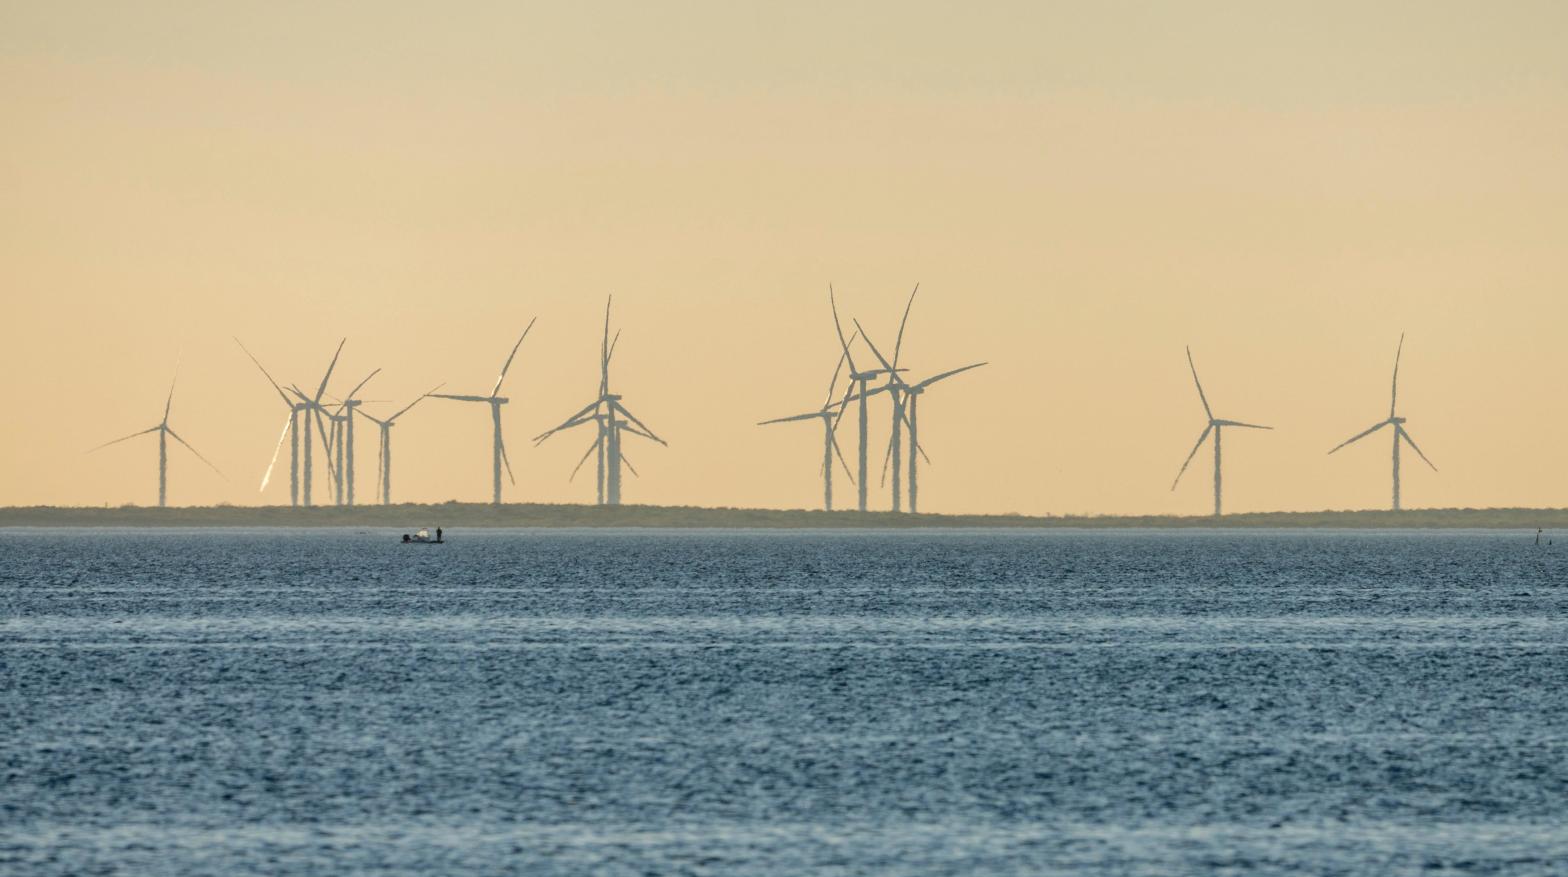 Fishermen in a boat on the Laguna Madre in front of giant wind generators on the mainland near Port Isabel, Texas. (Photo: Jon G. Fuller / VWPics, AP)